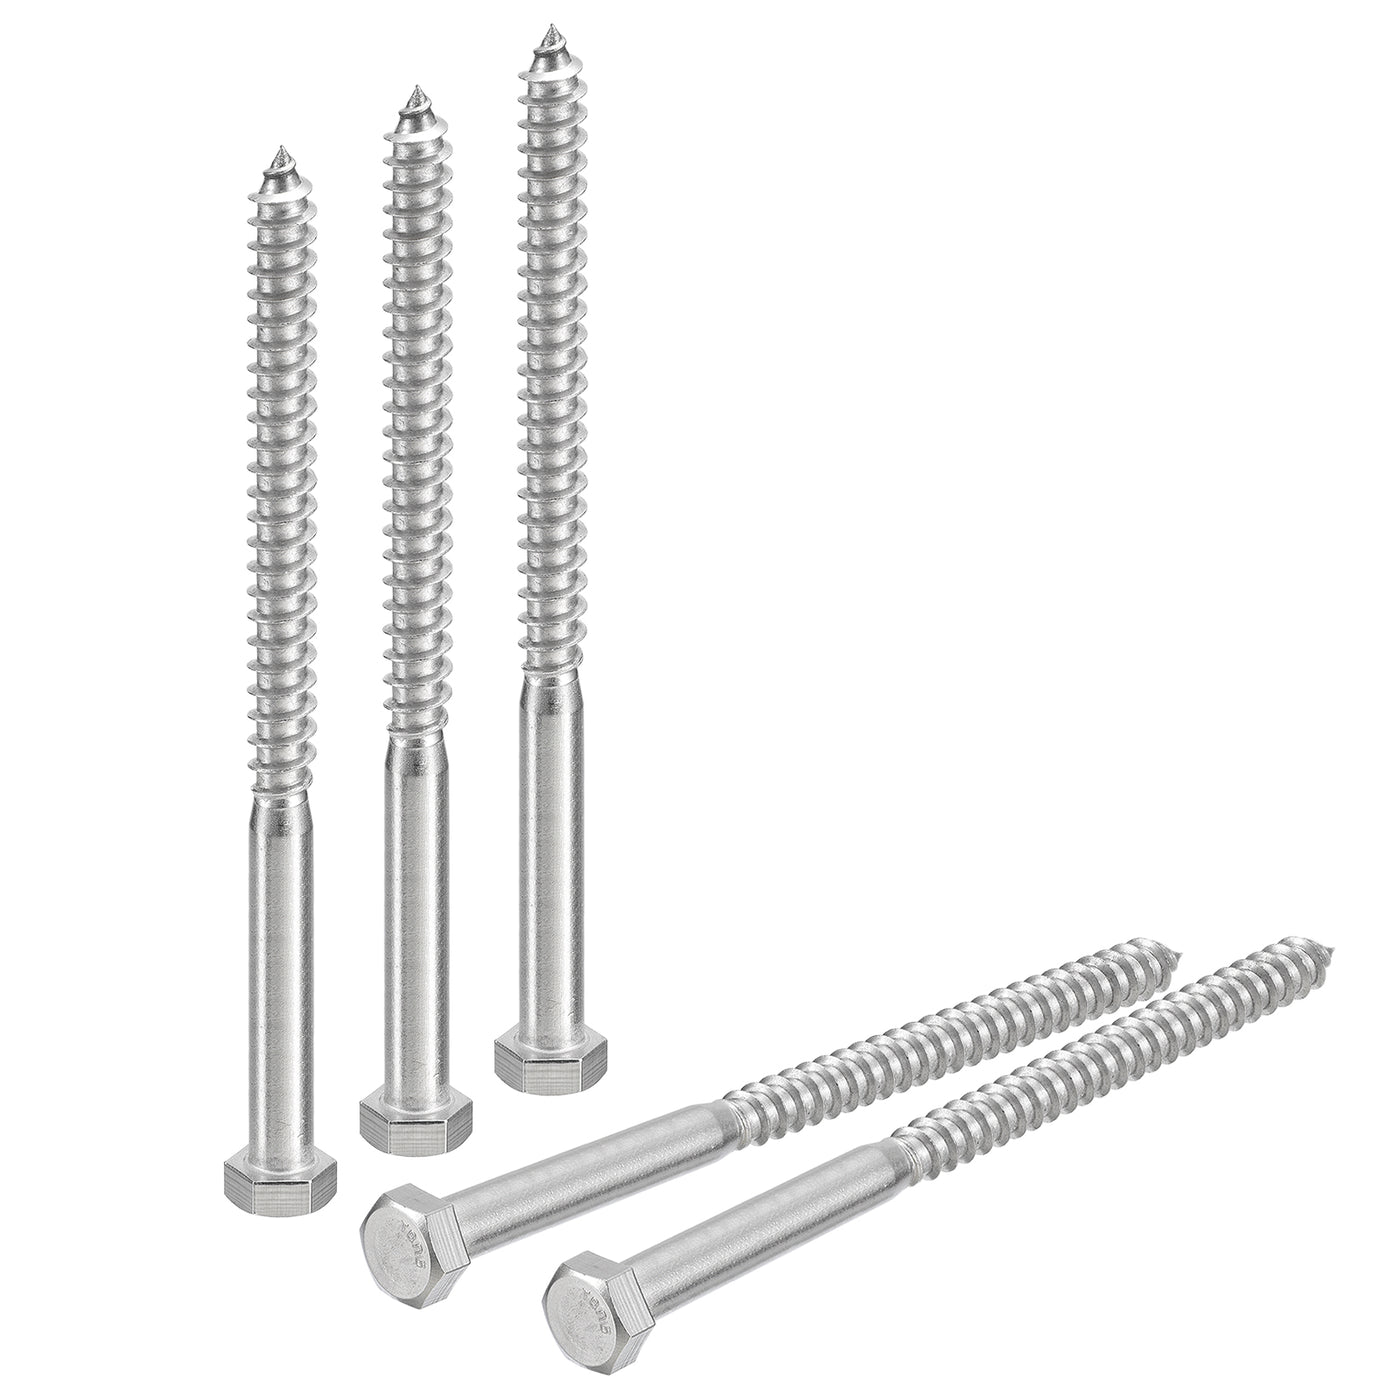 uxcell Uxcell Hex Head Lag Screws Bolts, 10pcs 3/8" x 6" 304 Stainless Steel Wood Screws